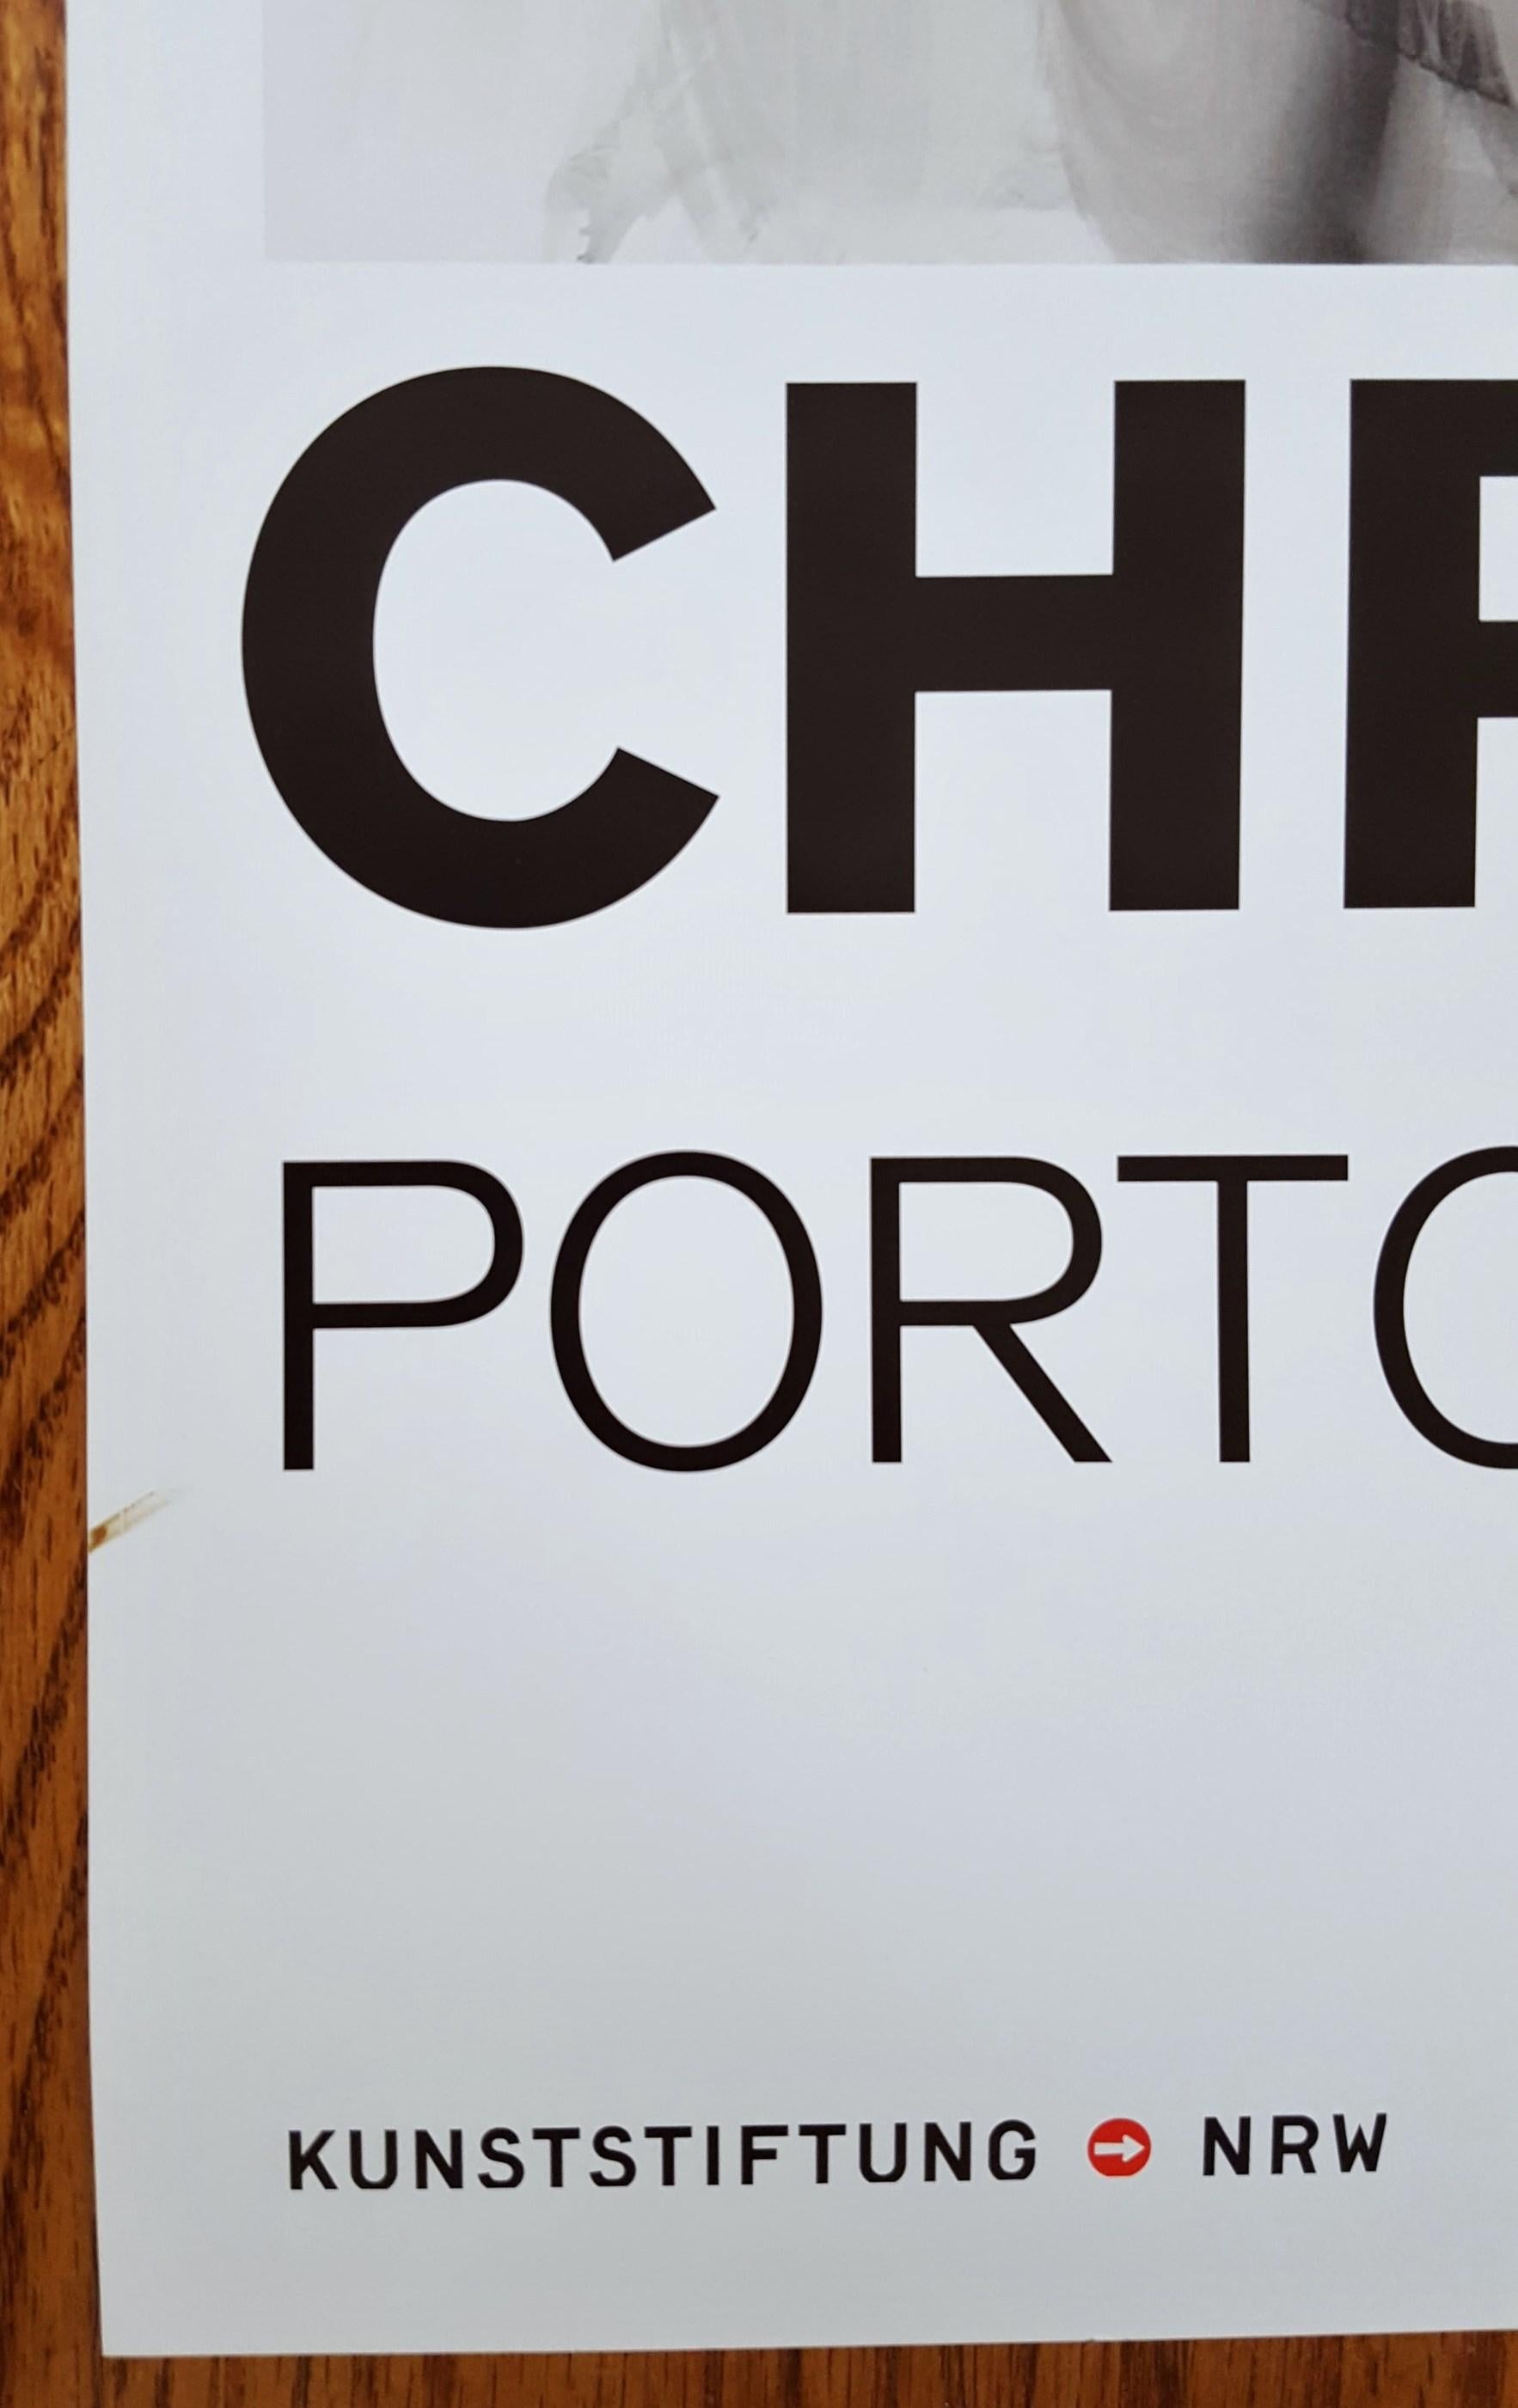 Christopher Wool: Porto - Köln (Signed) - Print by (after) Christopher Wool